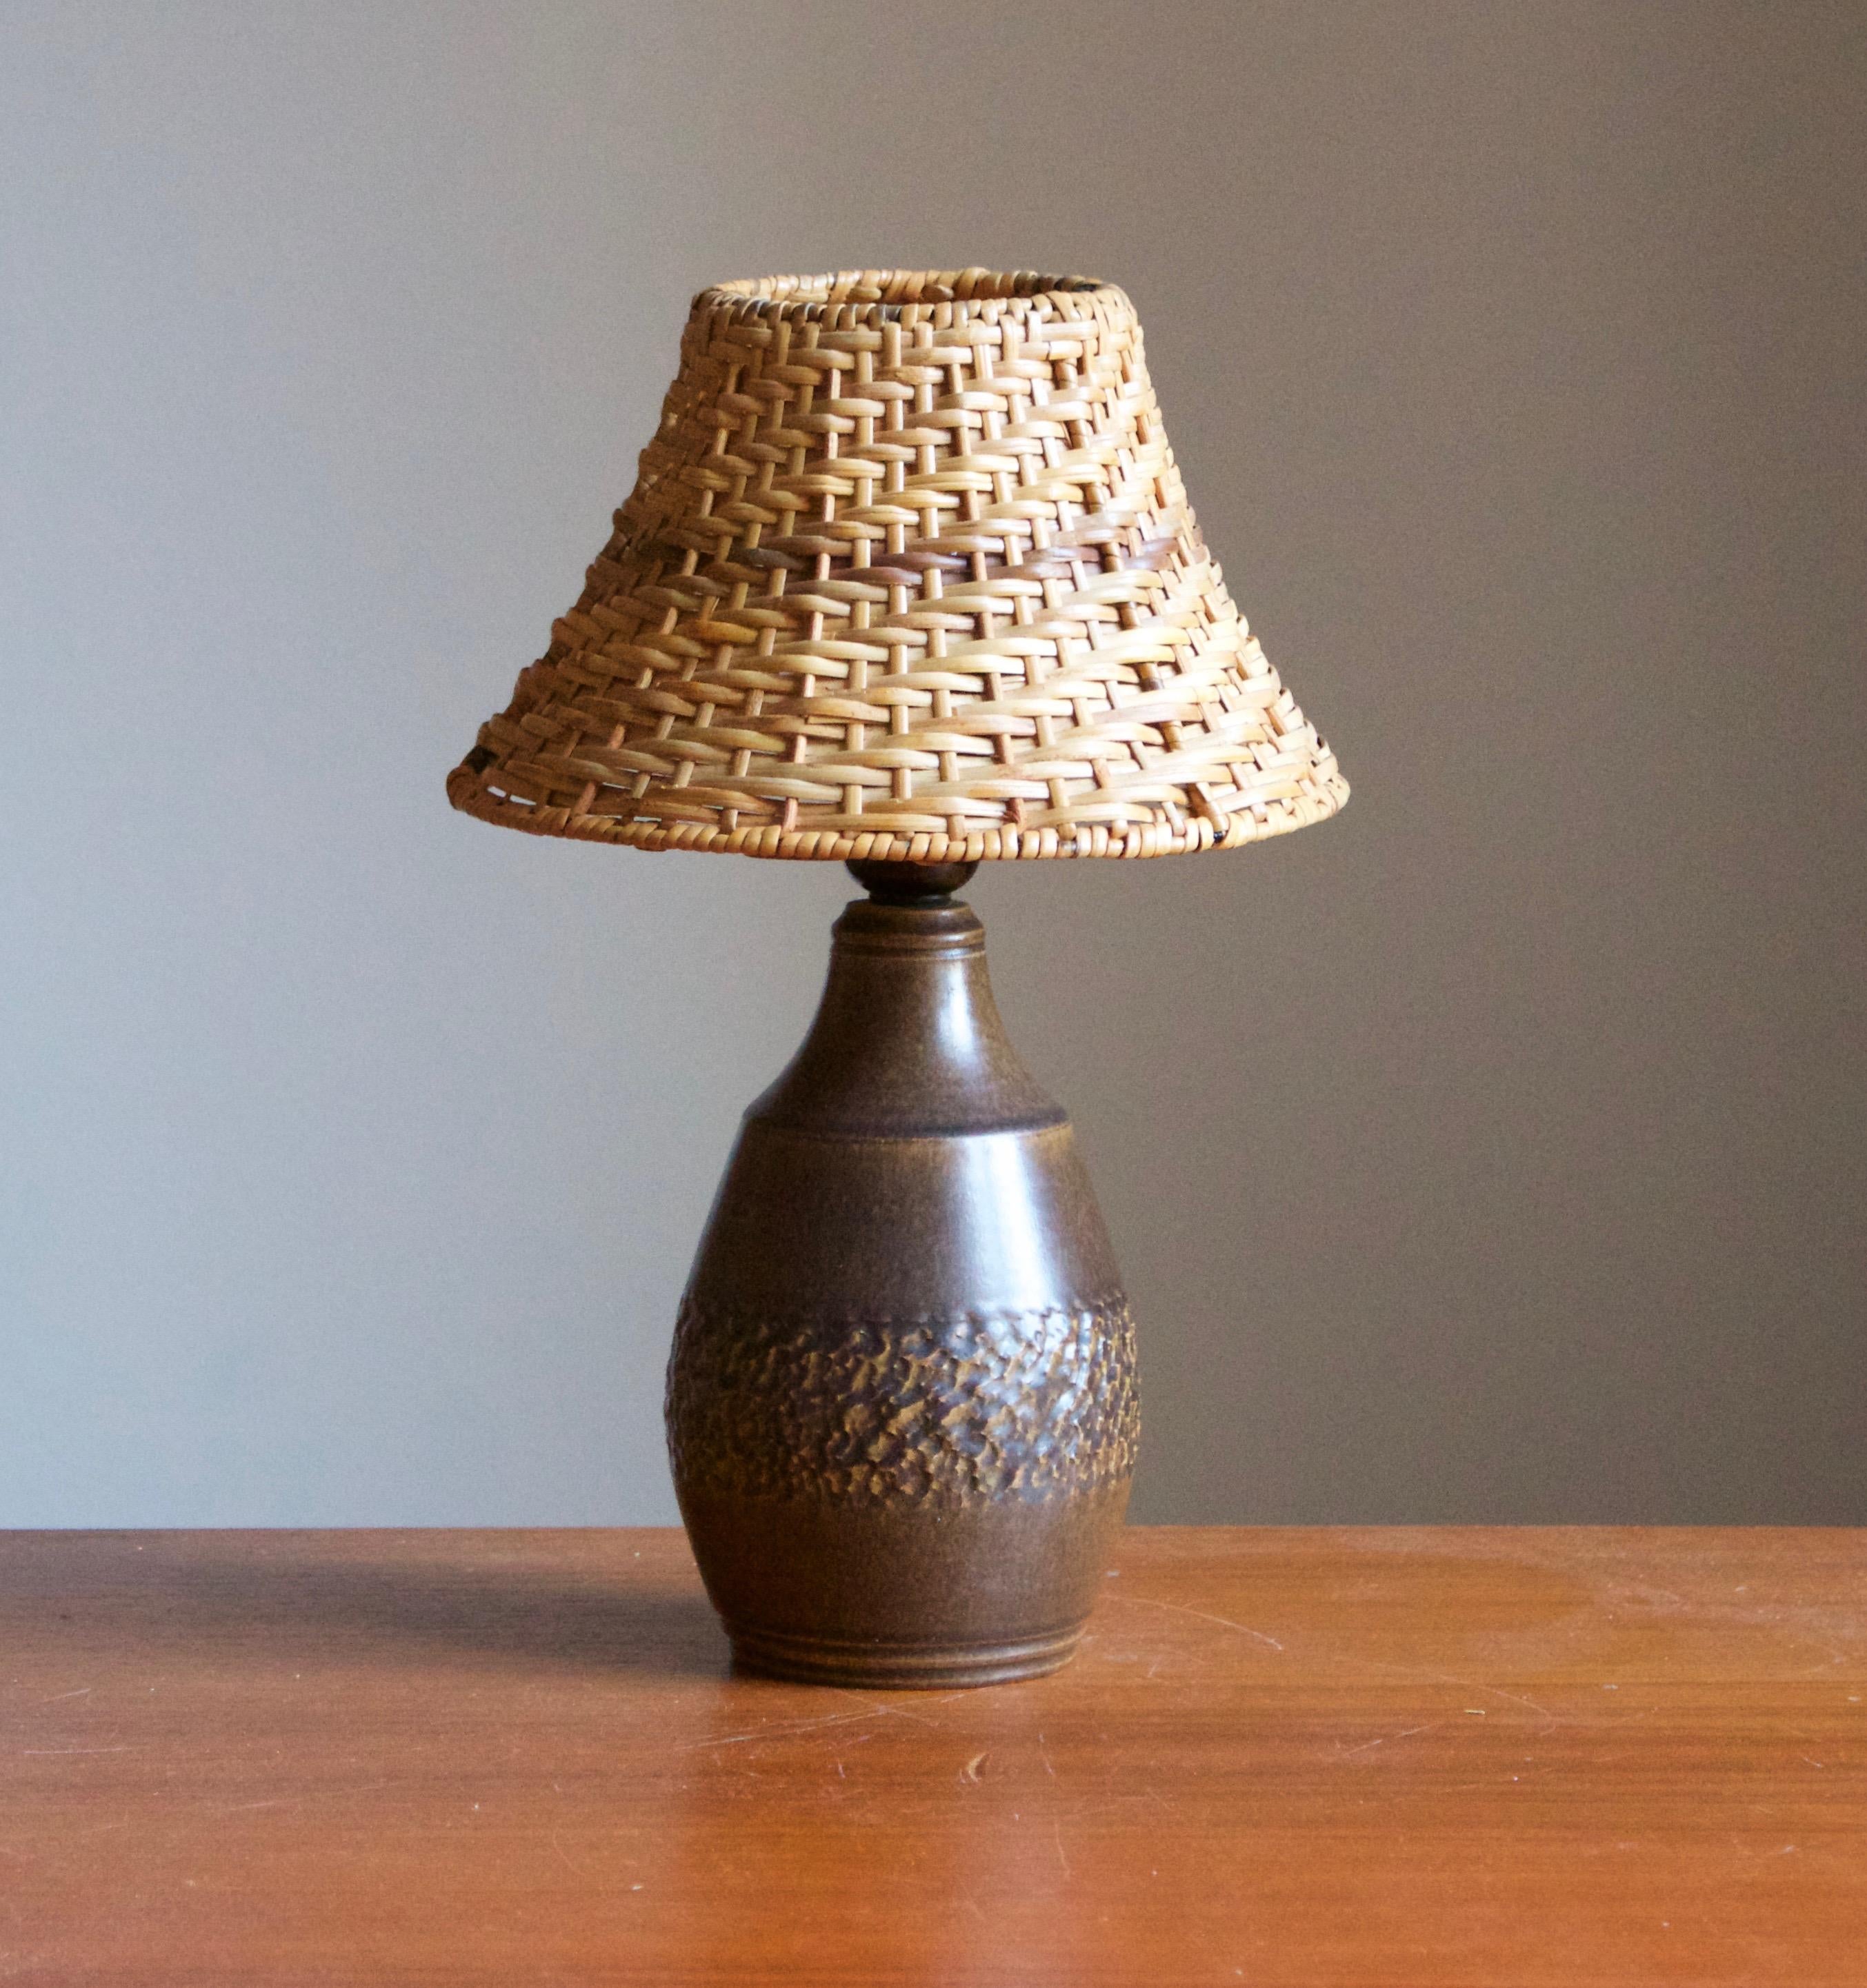 A sizable organic stoneware table lamp designed by Henry Brandi, and produced by his own firm, Brandi Vejbystrand, Sweden, 1960s. Marked and labeled. 

Stated dimensions exclude lampshade. Height includes socket. Assorted vintage rattan lampshade